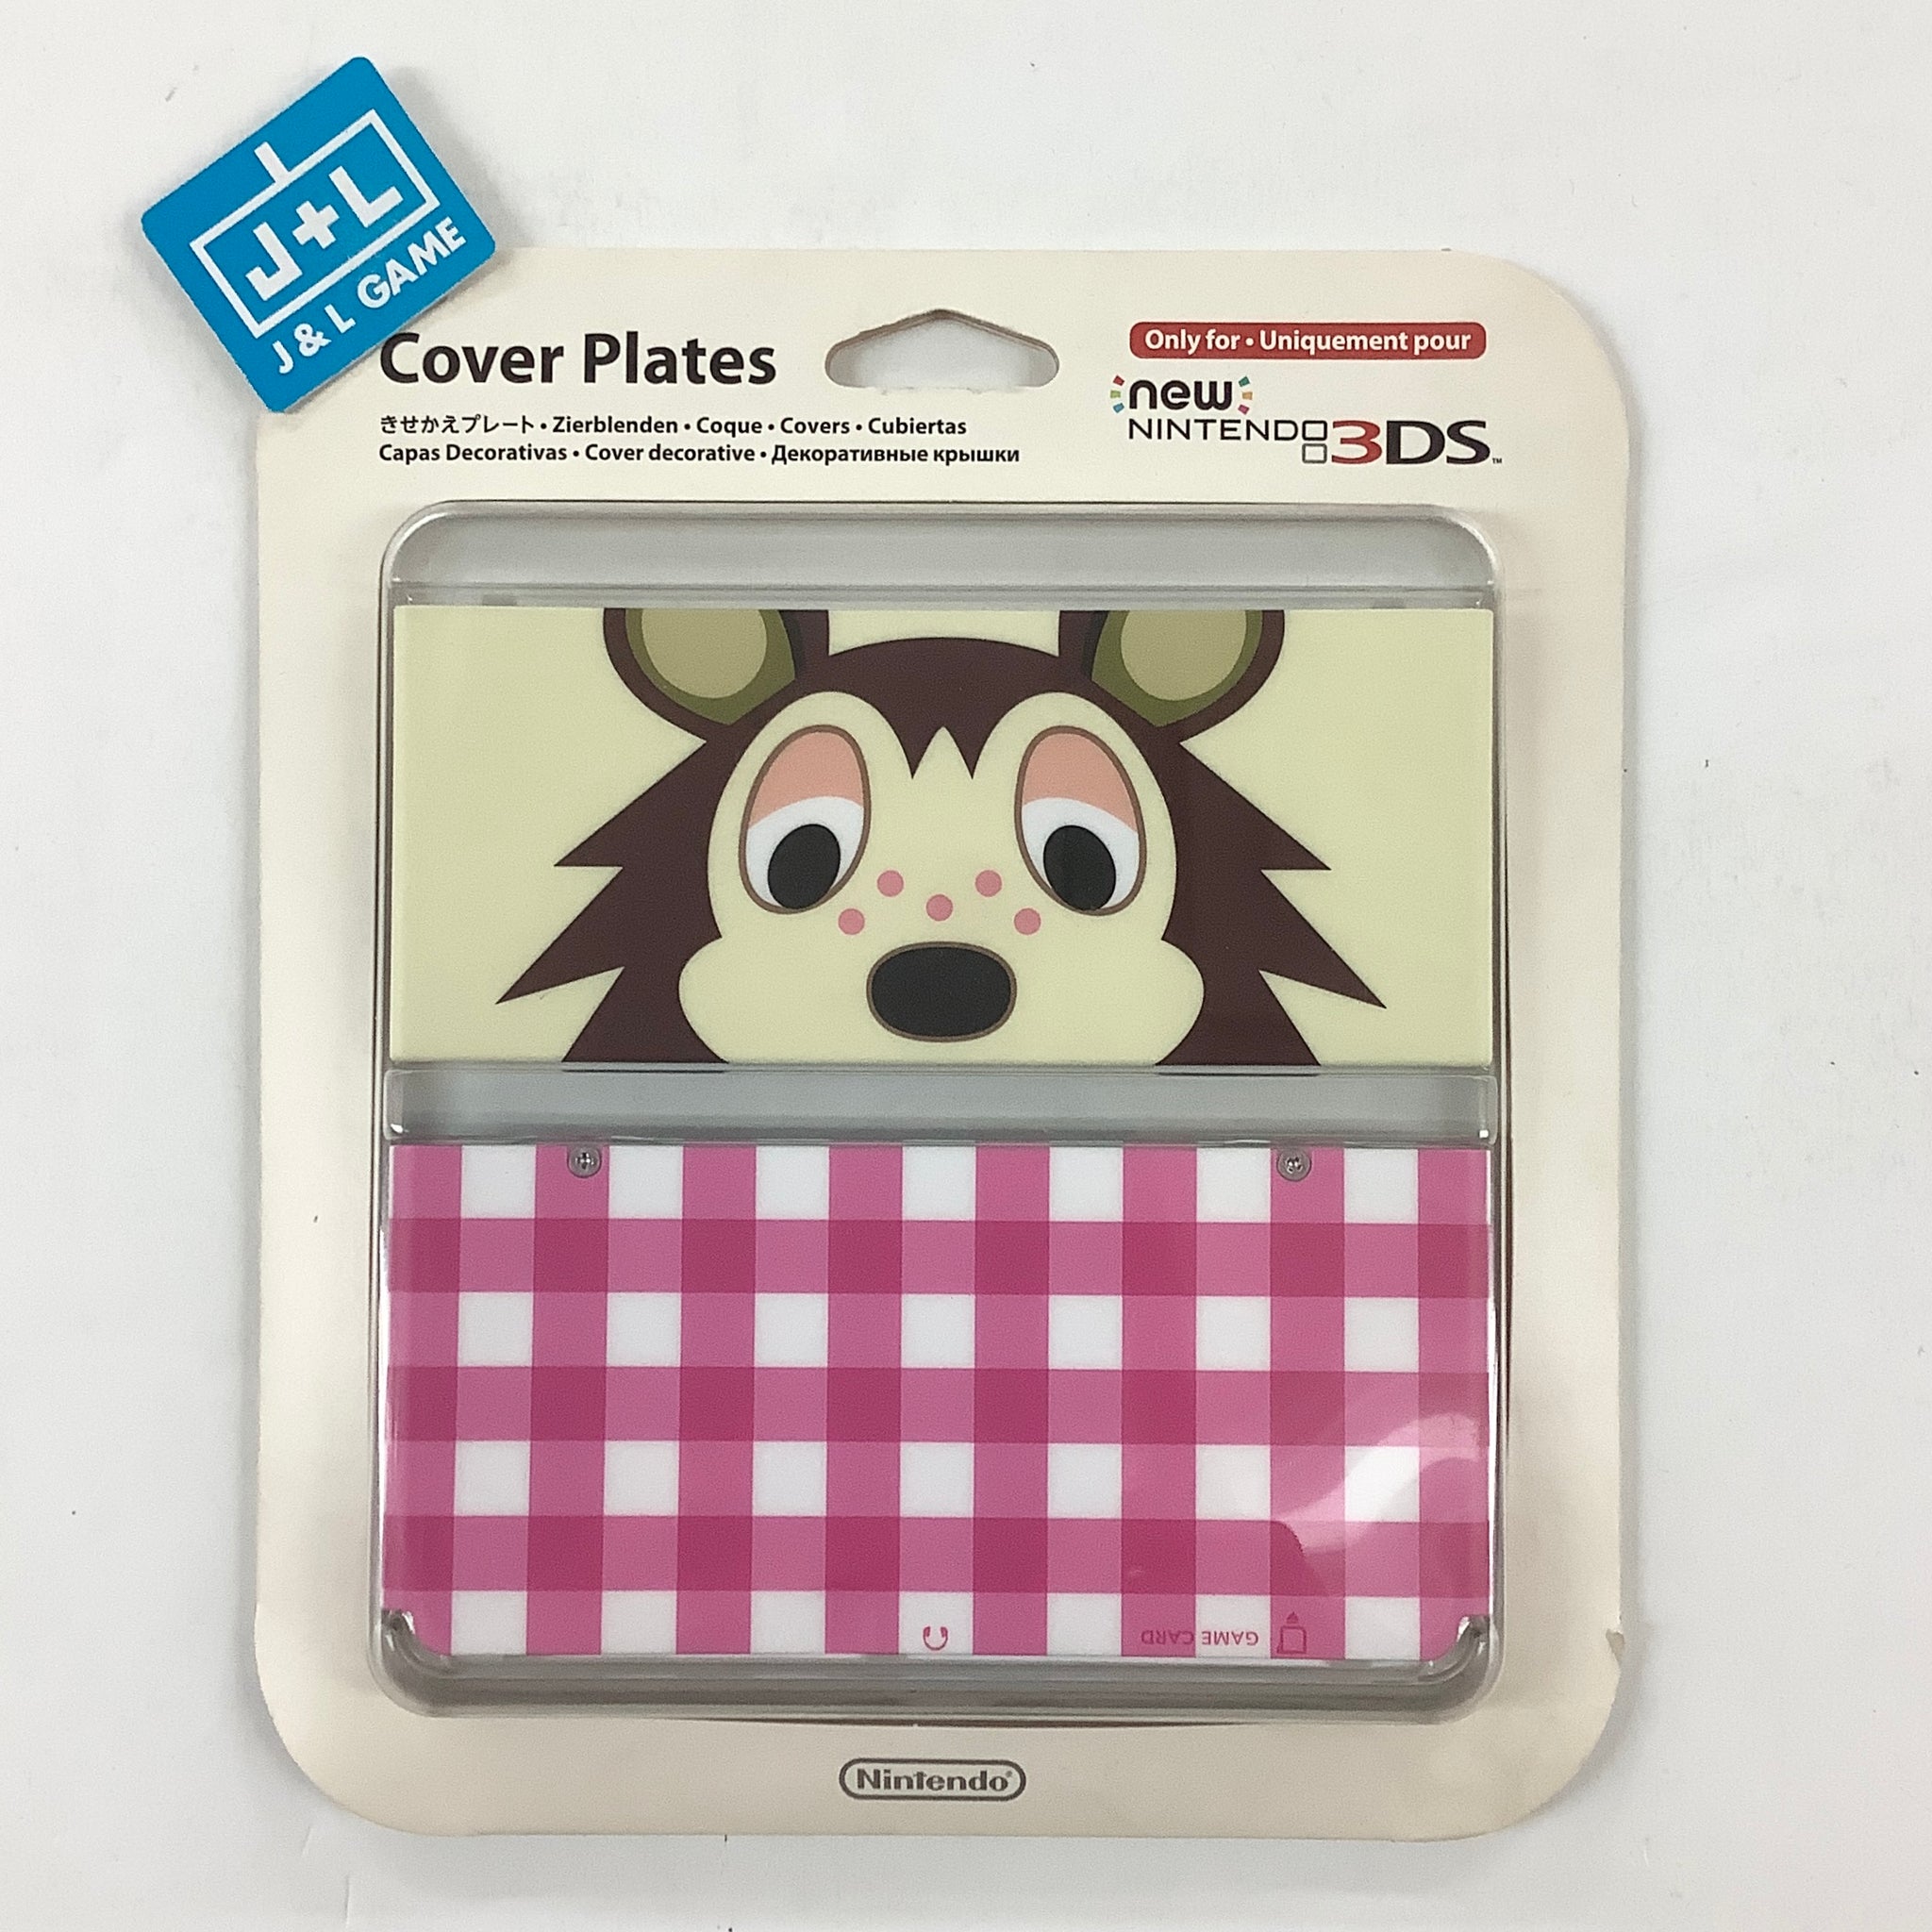 New Nintendo 3DS Cover Plates No.016 (Animal Crossing Sable) - New Nintendo 3DS (Japanese Import) Accessories Nintendo   